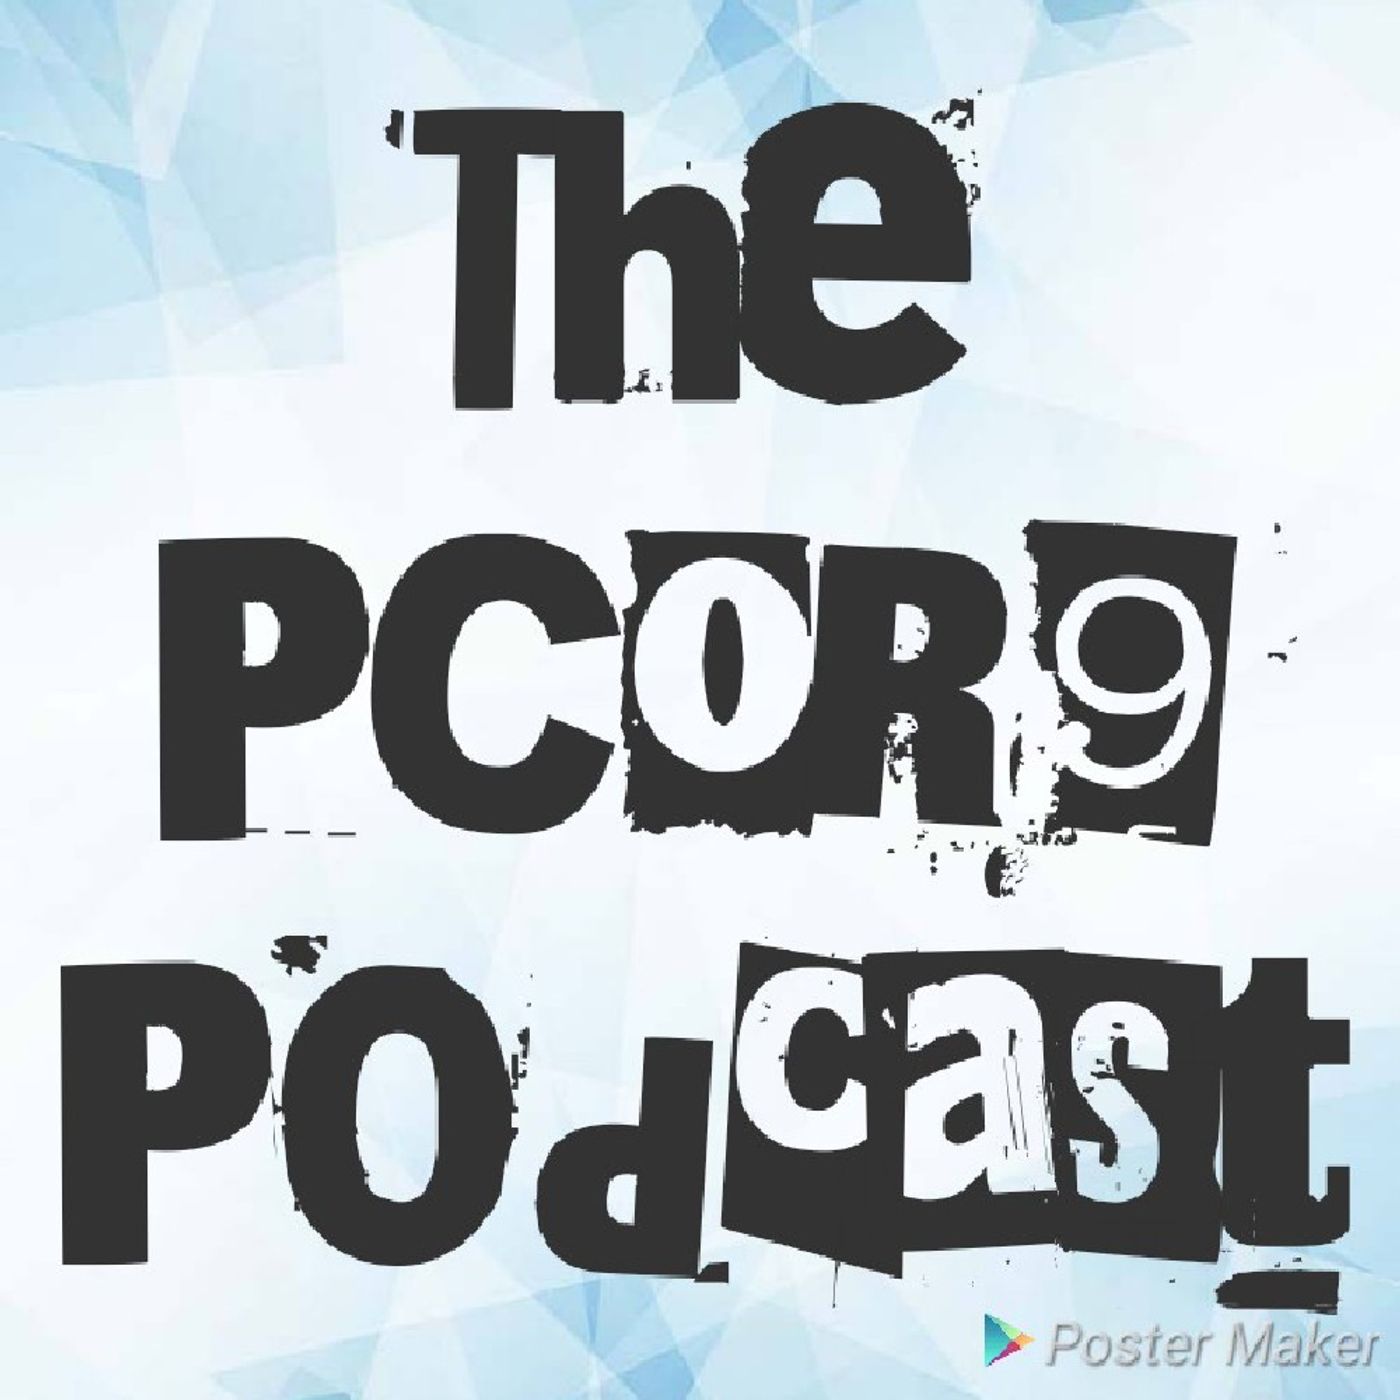 The PCOR9 Podcast